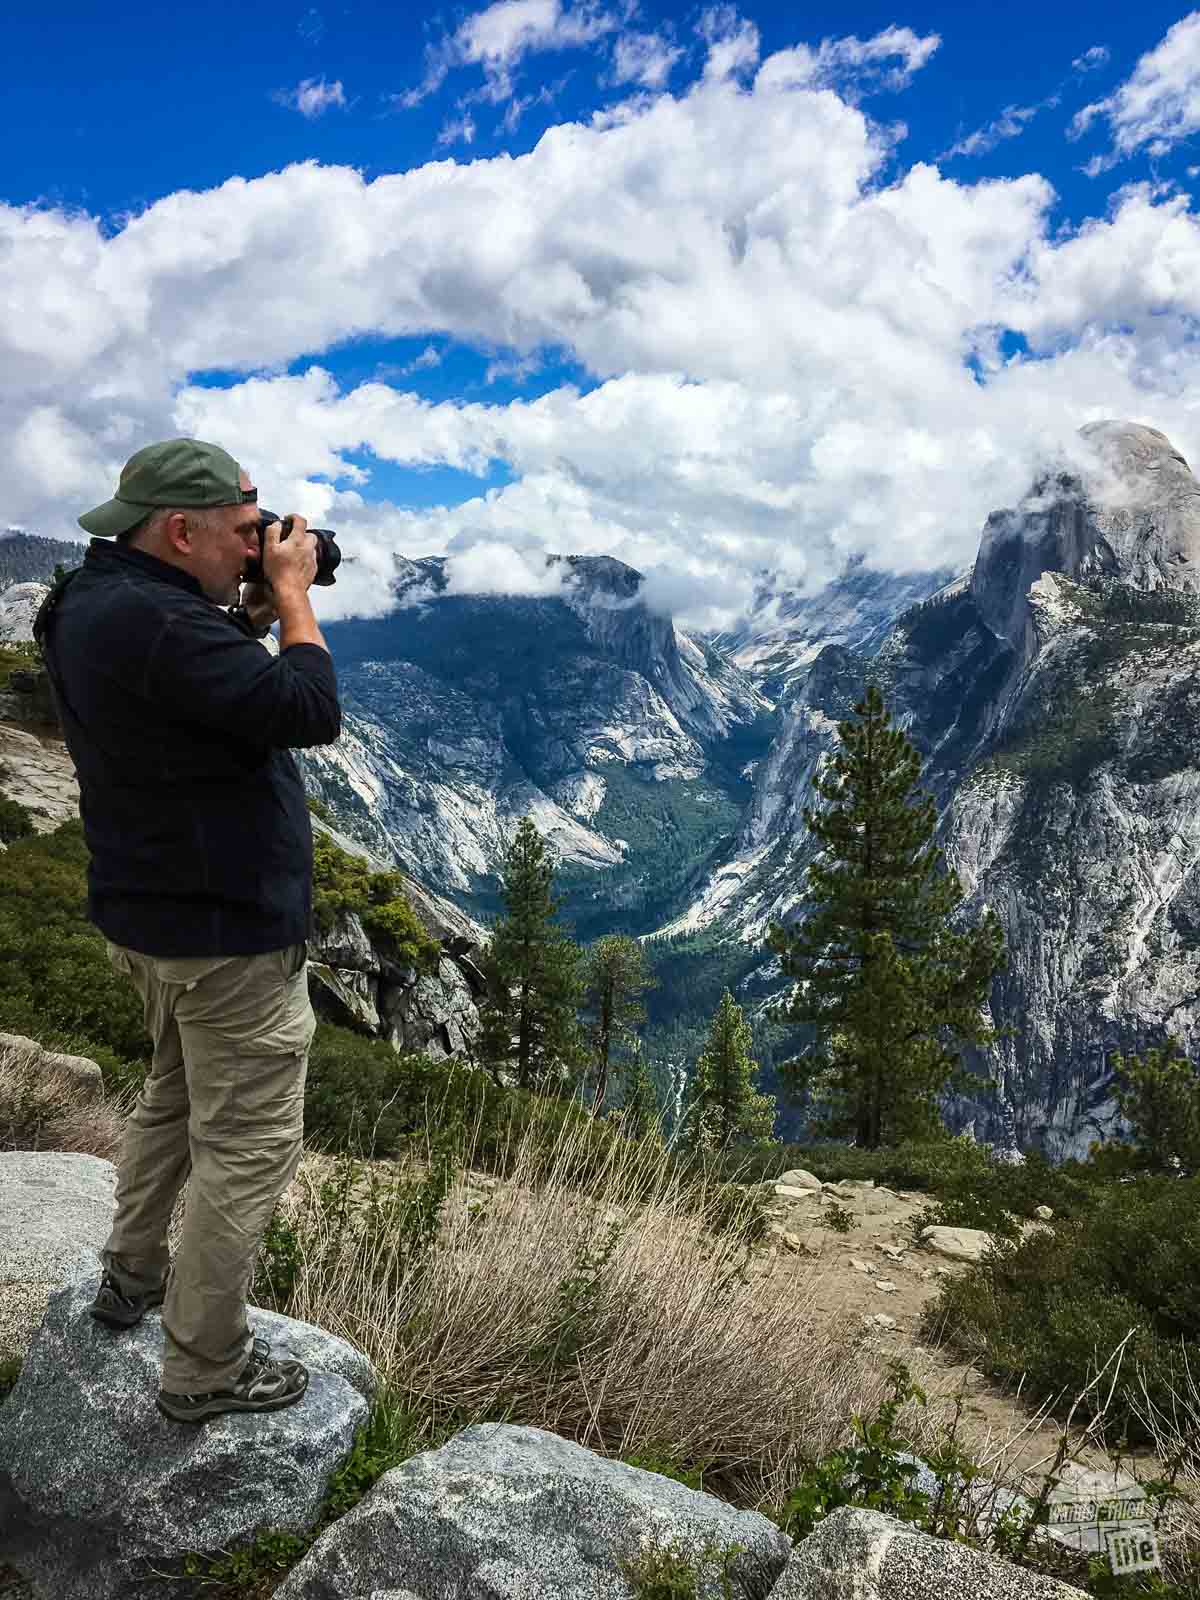 Grant taking a picture in Yosemite National Park.